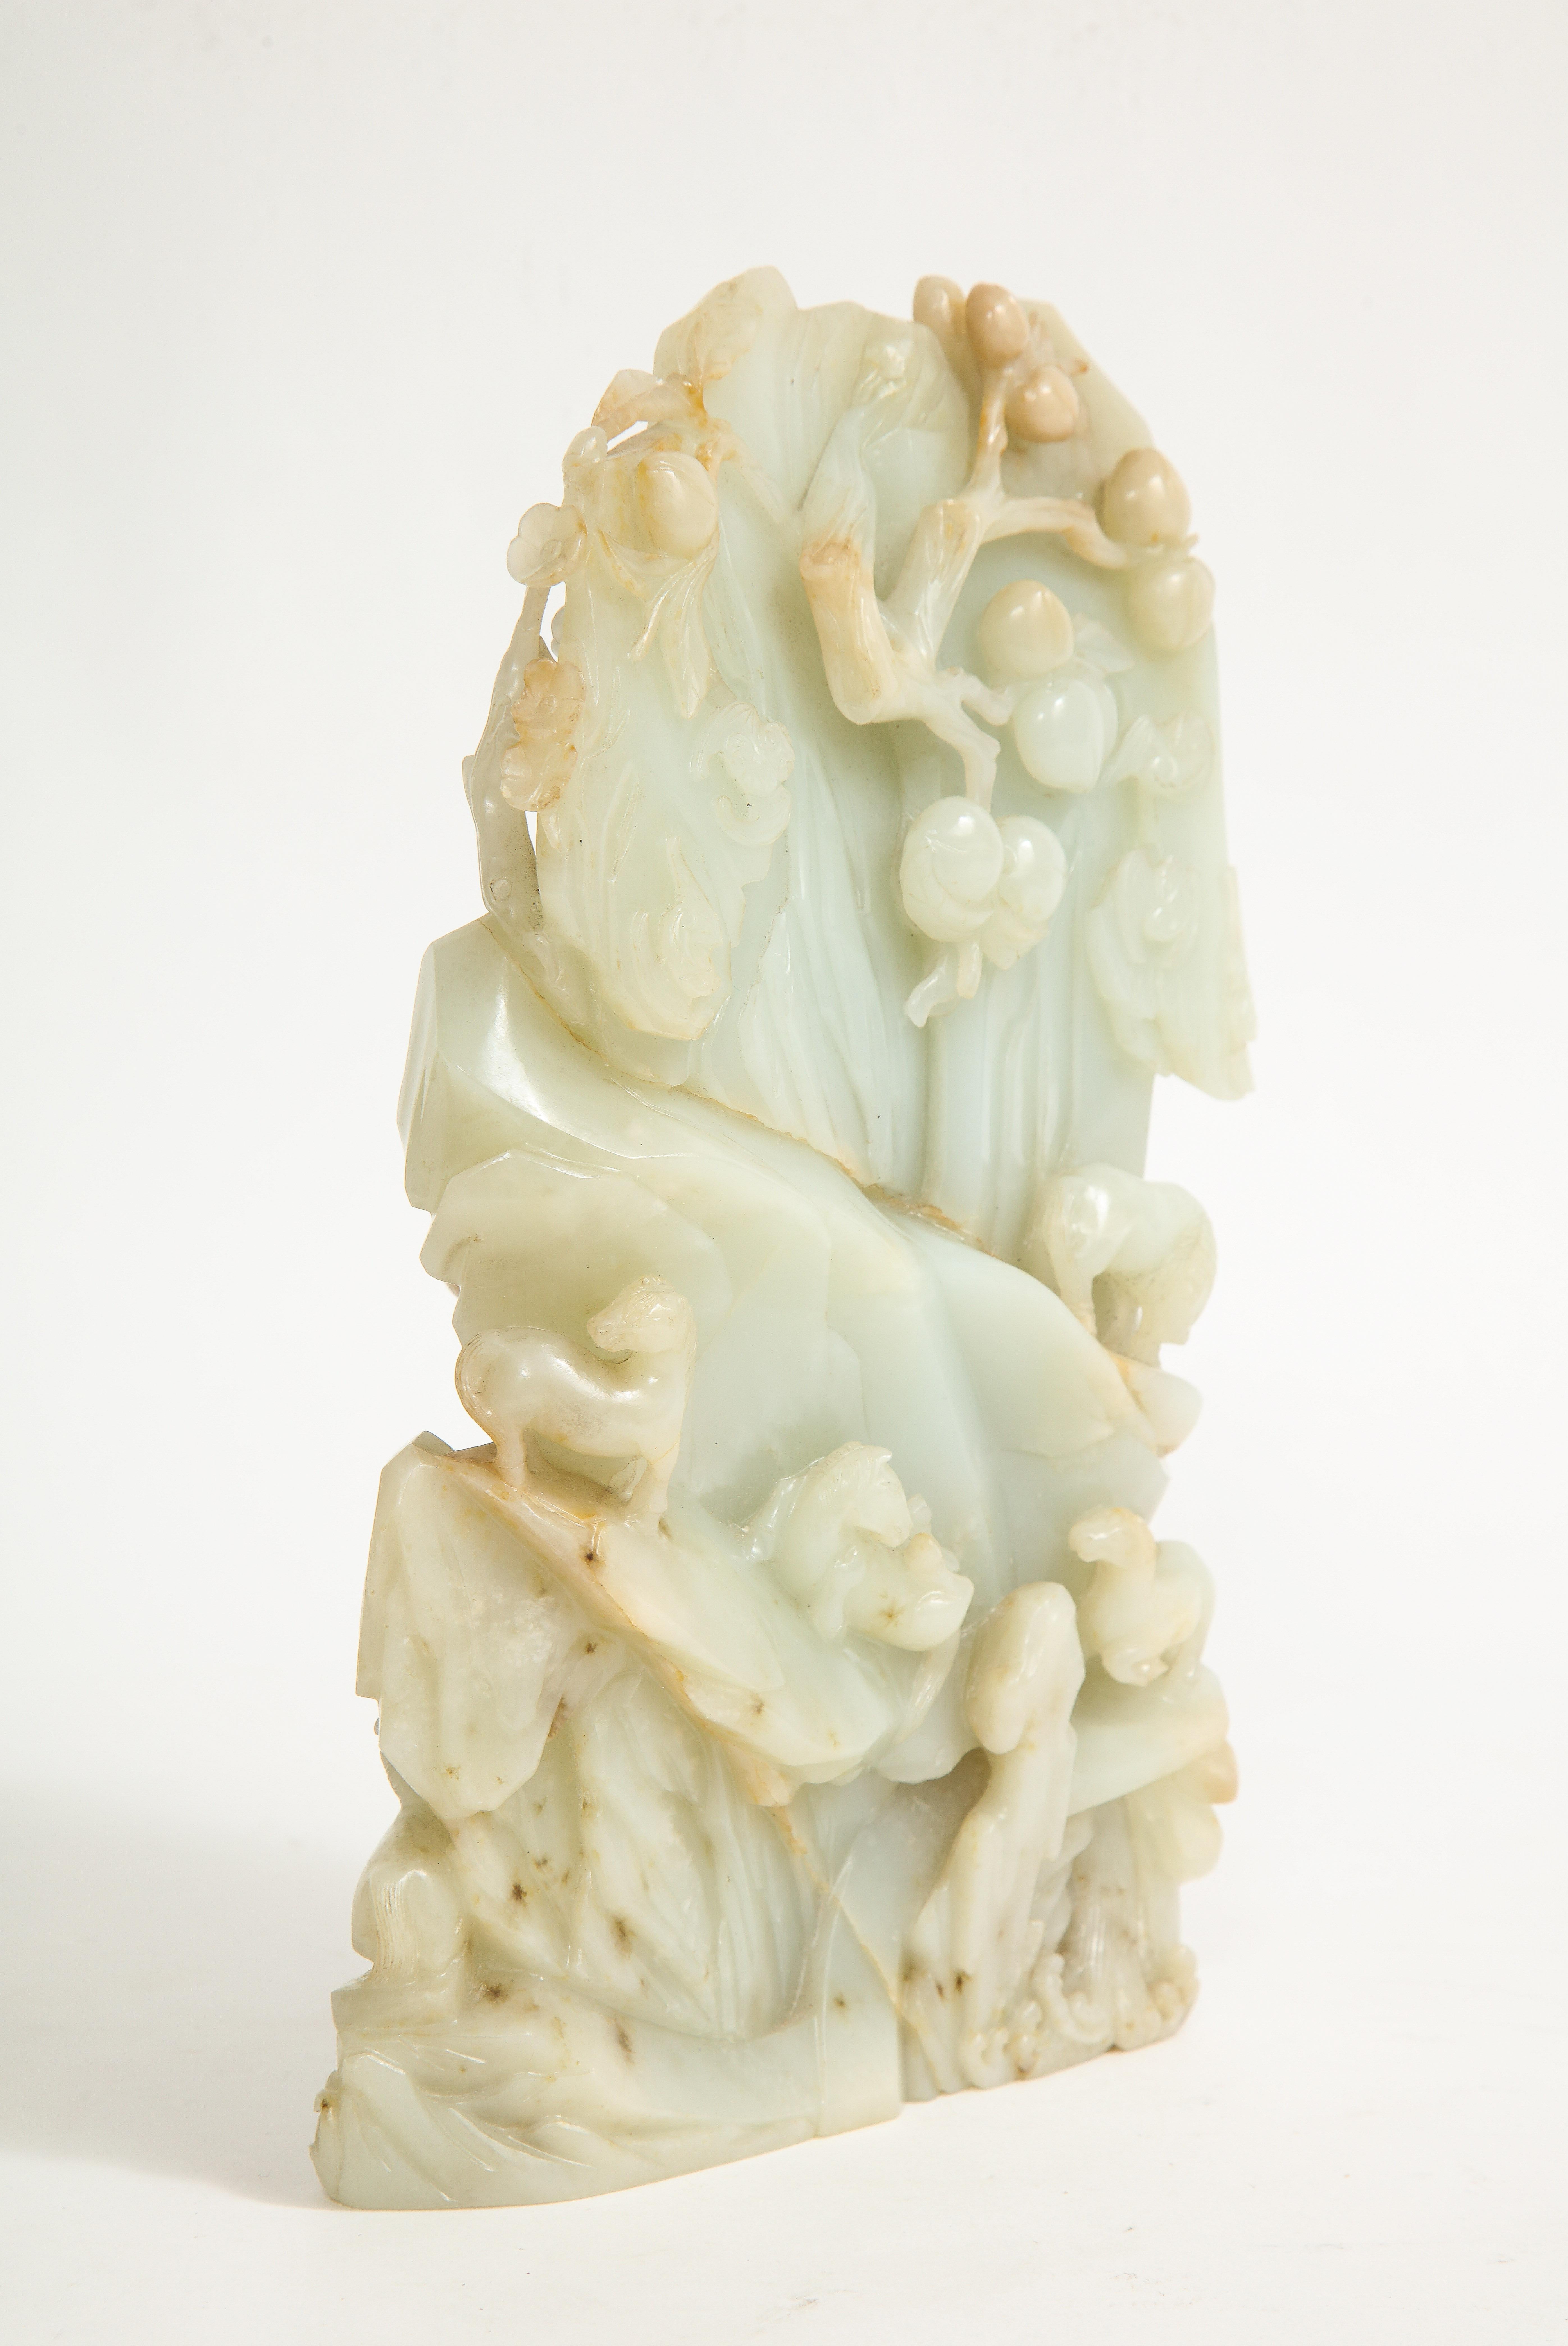 18th Century Large 18th/19th C. Chinese Pale Celadon Jade High Relief Hand-Carved Mountain